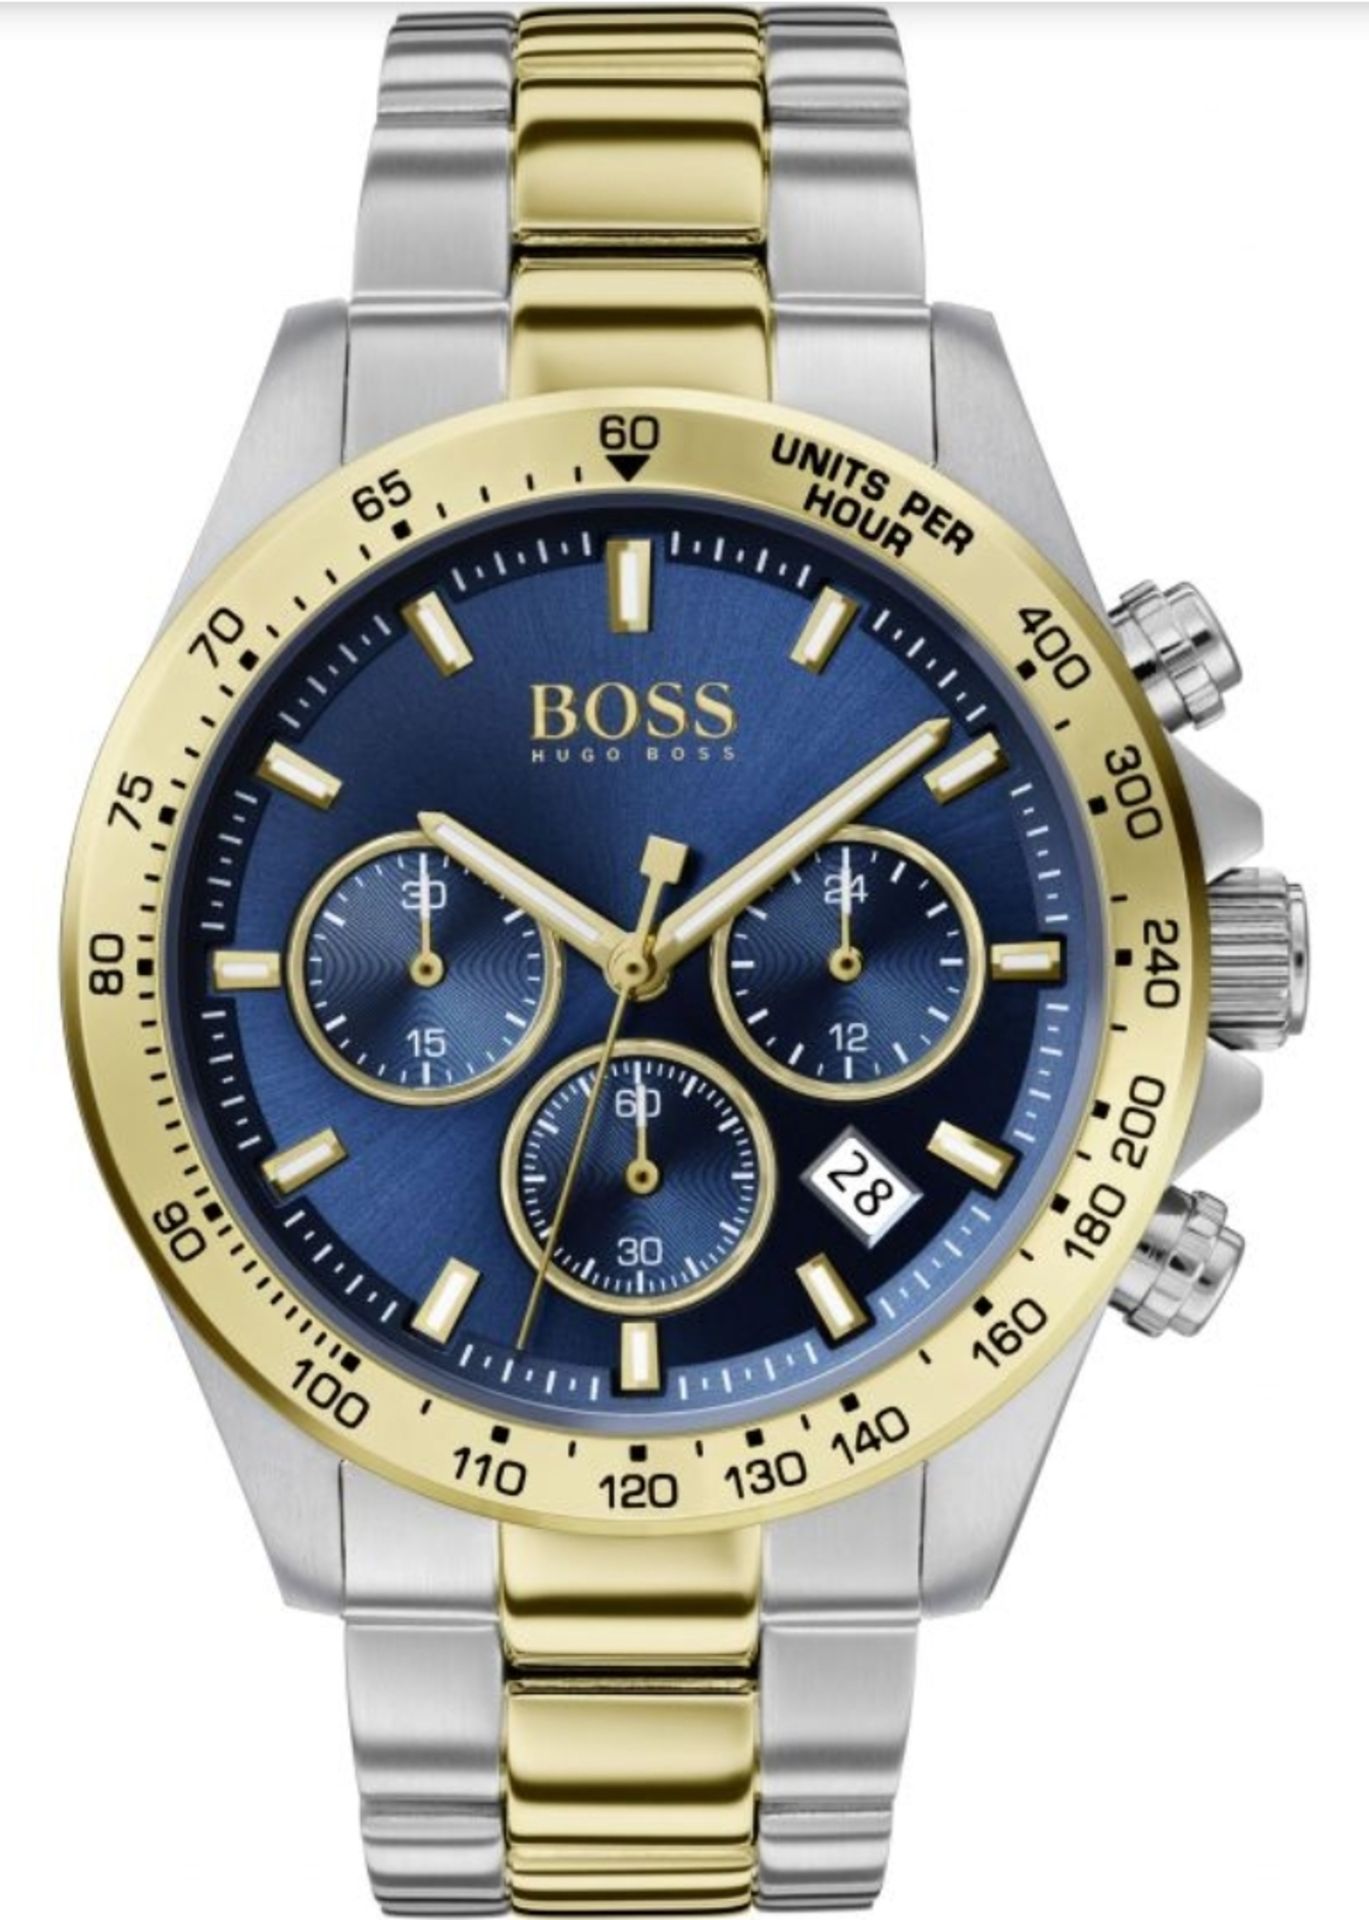 Hugo Boss Trade Lot 1C. A Total Of 20 Brand New Hugo Boss Watches - Image 19 of 20